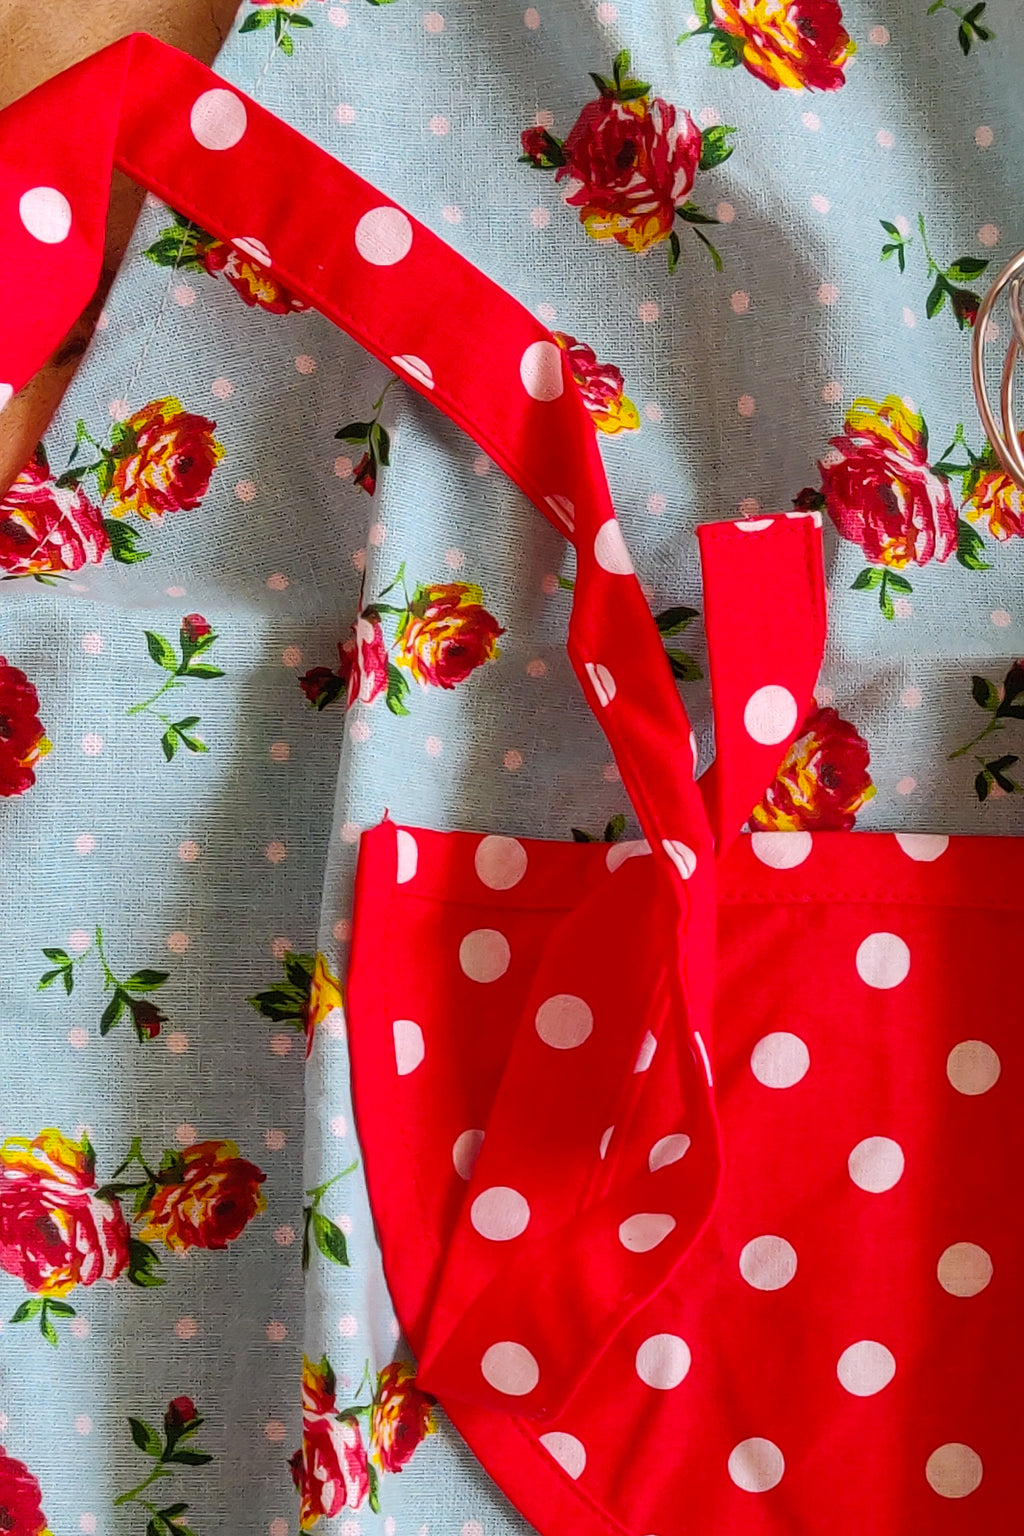 Flower print kitchen apron with dish towel